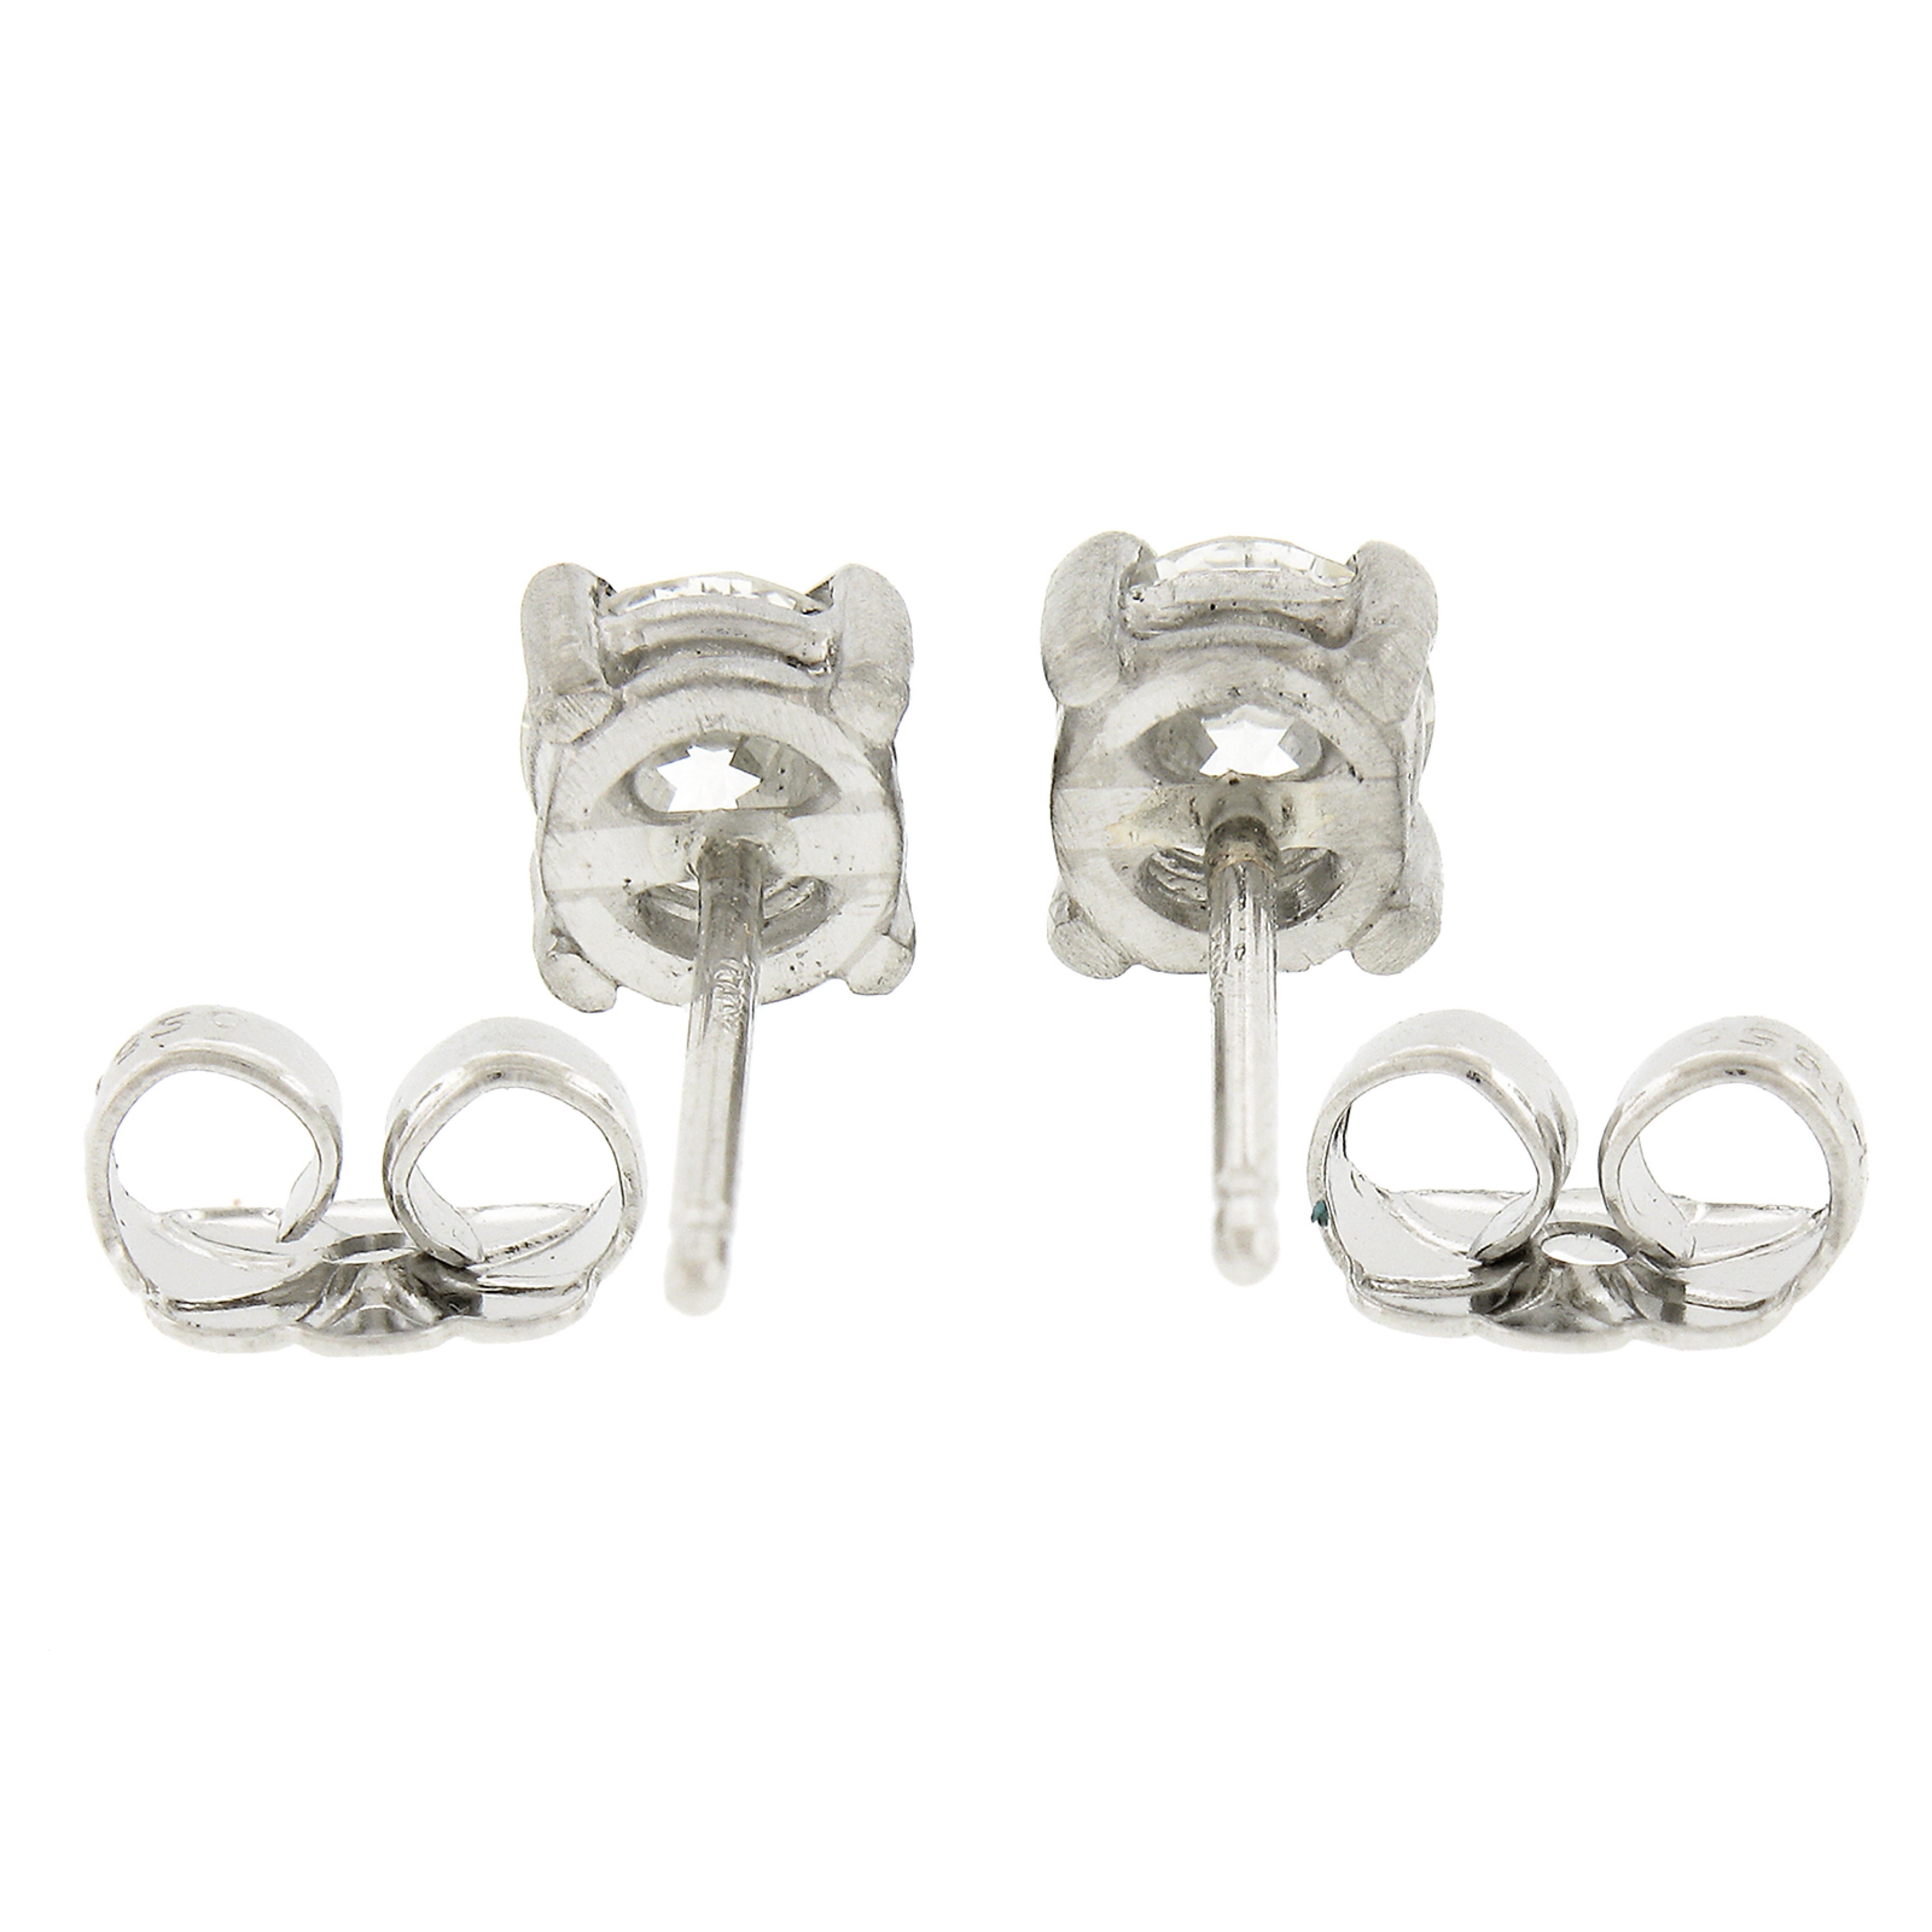 --Stone(s):--
(2) Natural Genuine Diamonds - Old European Cut - Prong Set - H/I Color - VS2 Clarity
Total Carat Weight:	0.76 (exact)

Material: Solid Platinum
Weight: 1.75 Grams
Backing:	Post Backs w/ Sturdy Butterfly Closures (Pierced ears are